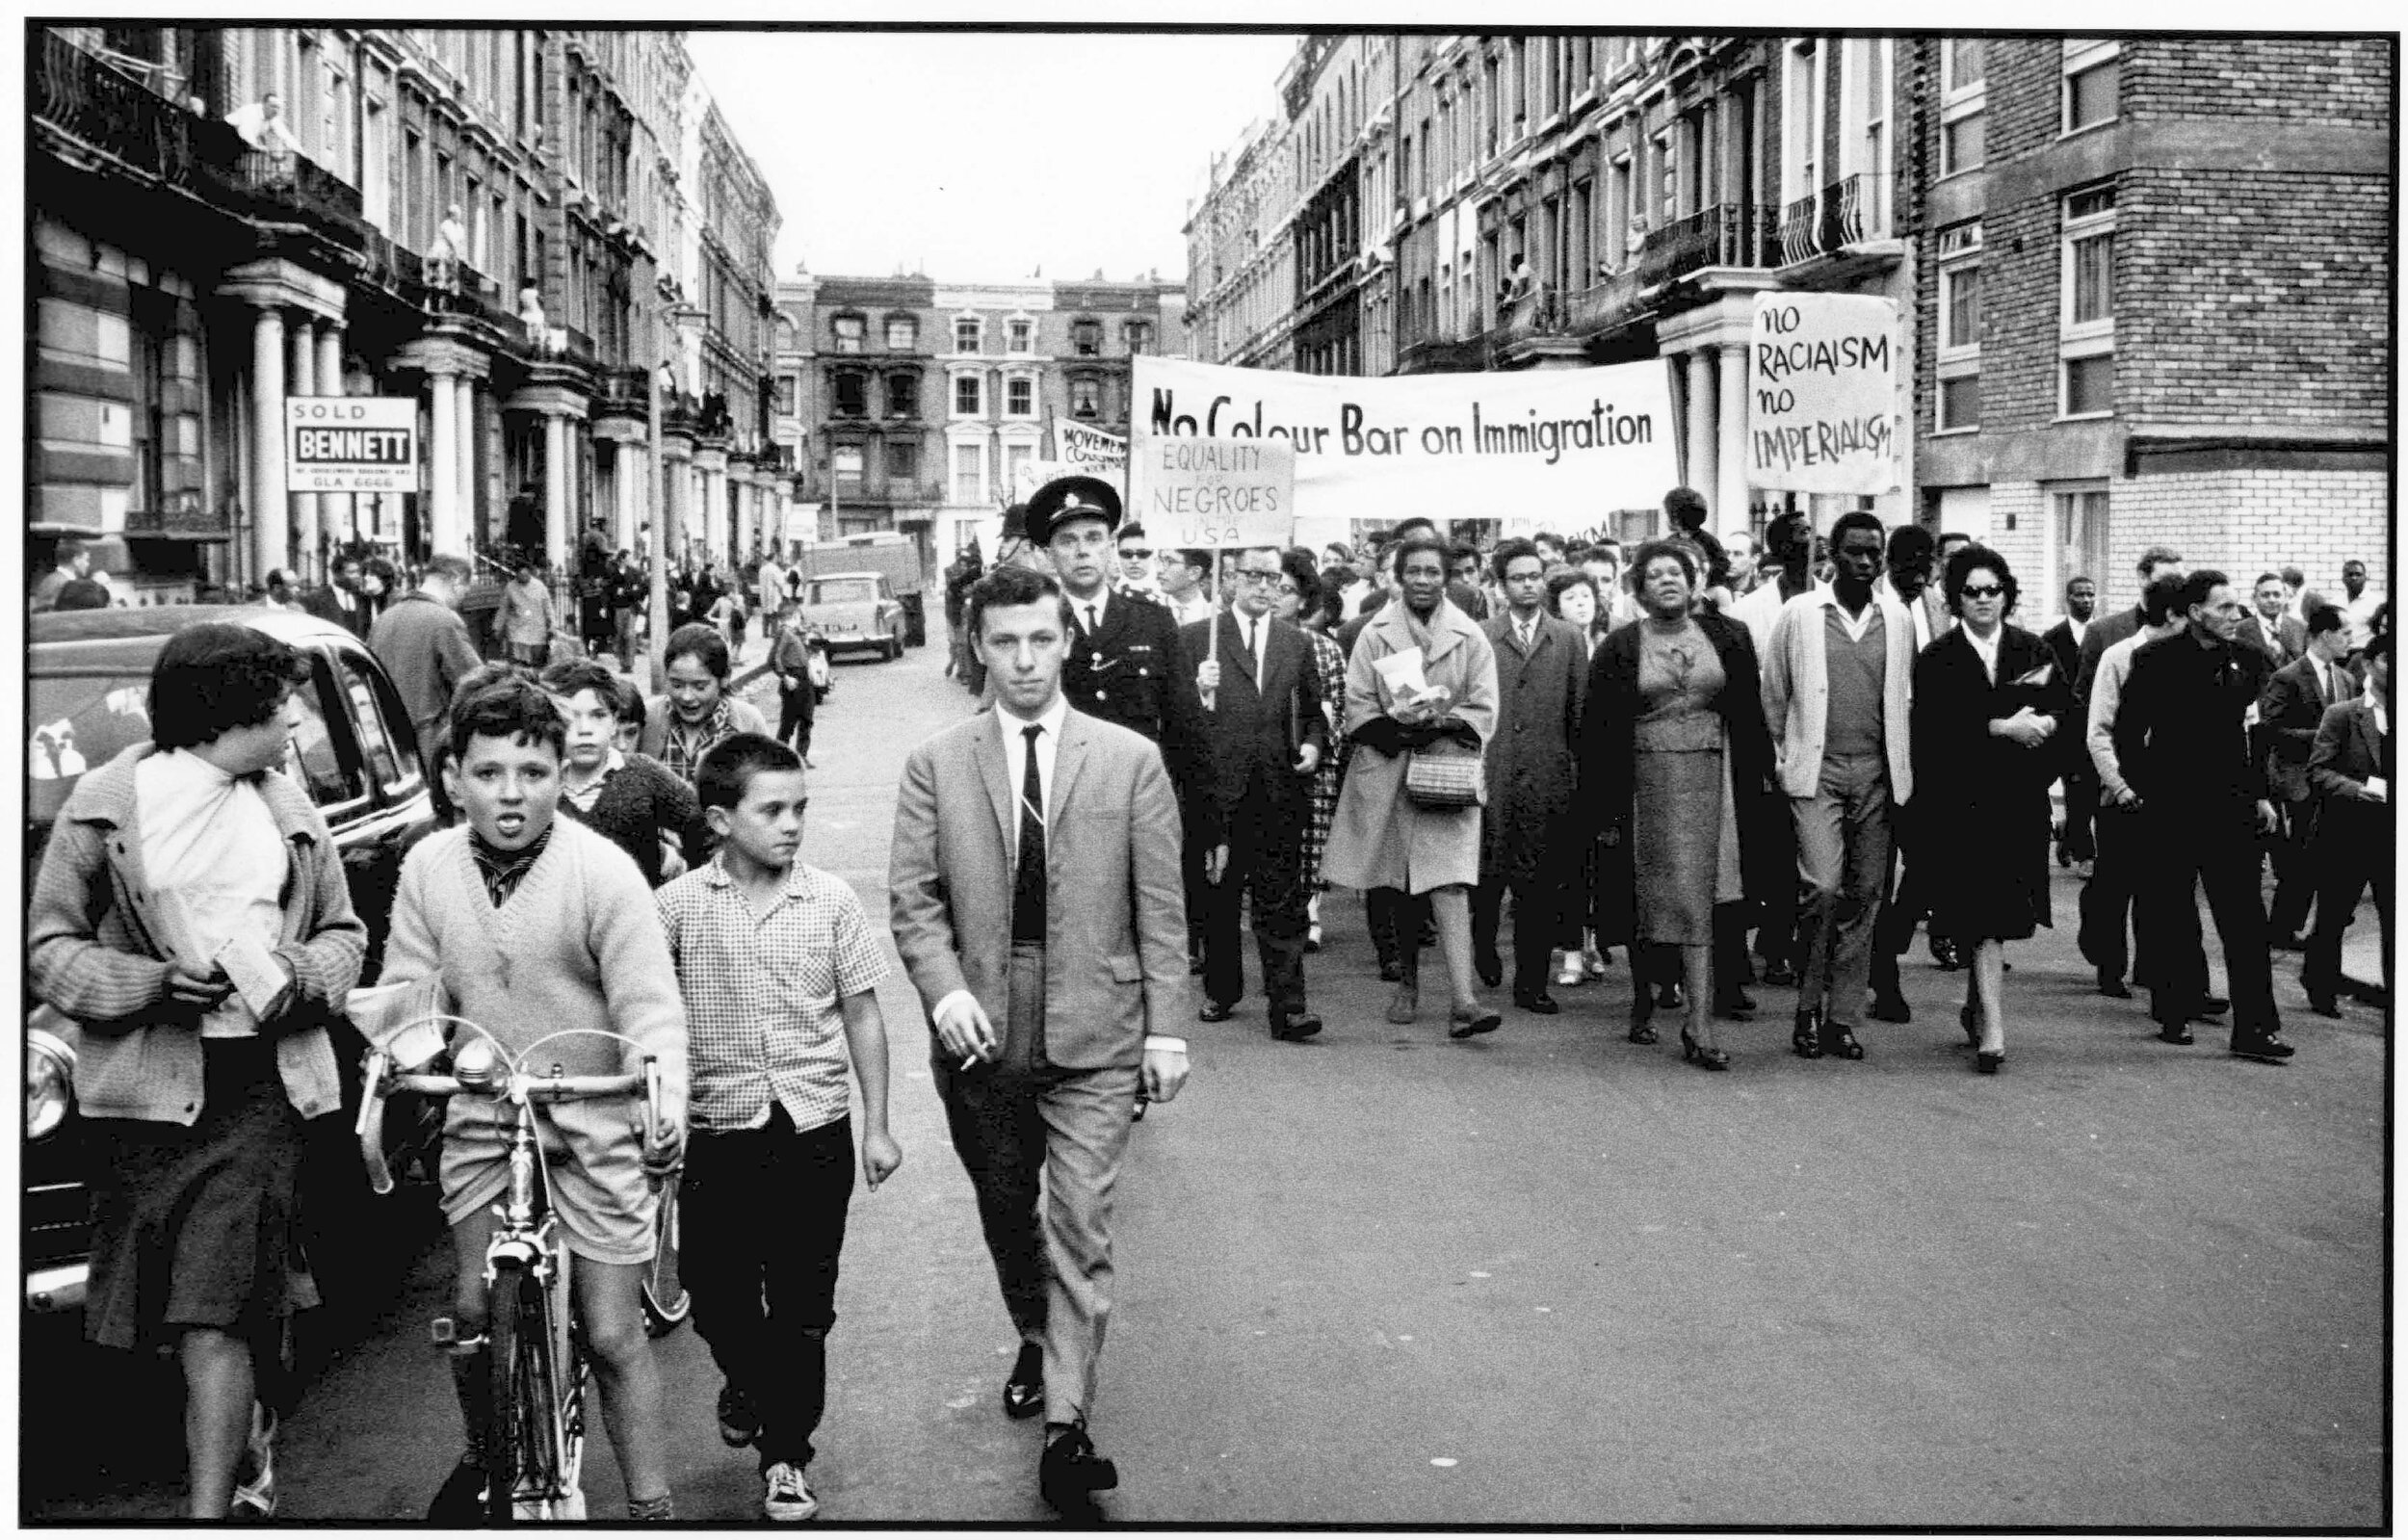 Notting Hill Residents March Against Racism, London, c.1965